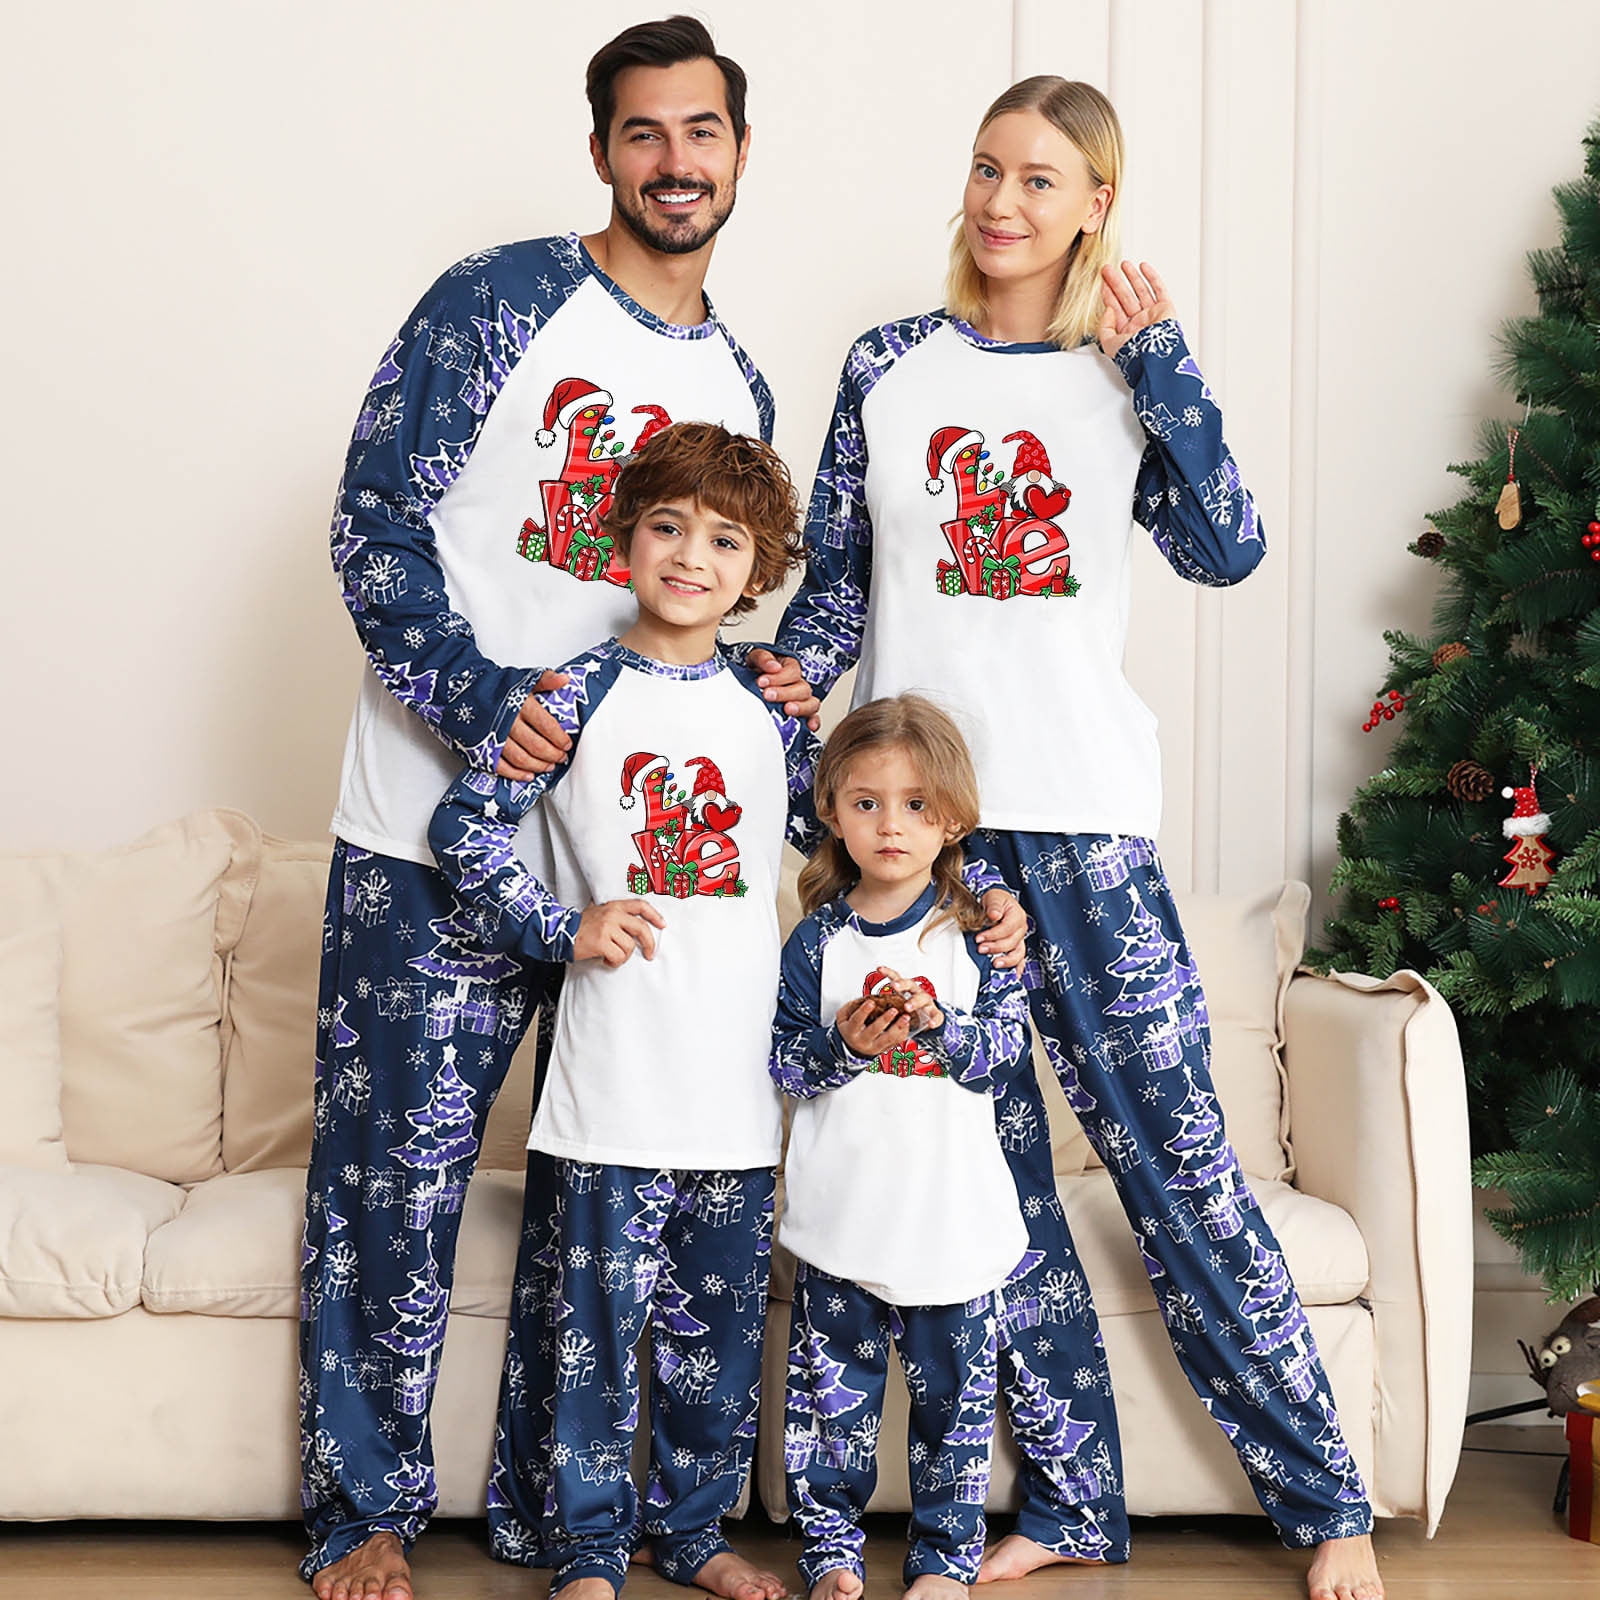 Family Christmas Pajamas 2021 | Merry Christmas Family Pjs With Dog For  Sale - The Wholesale T-Shirts By VinCo